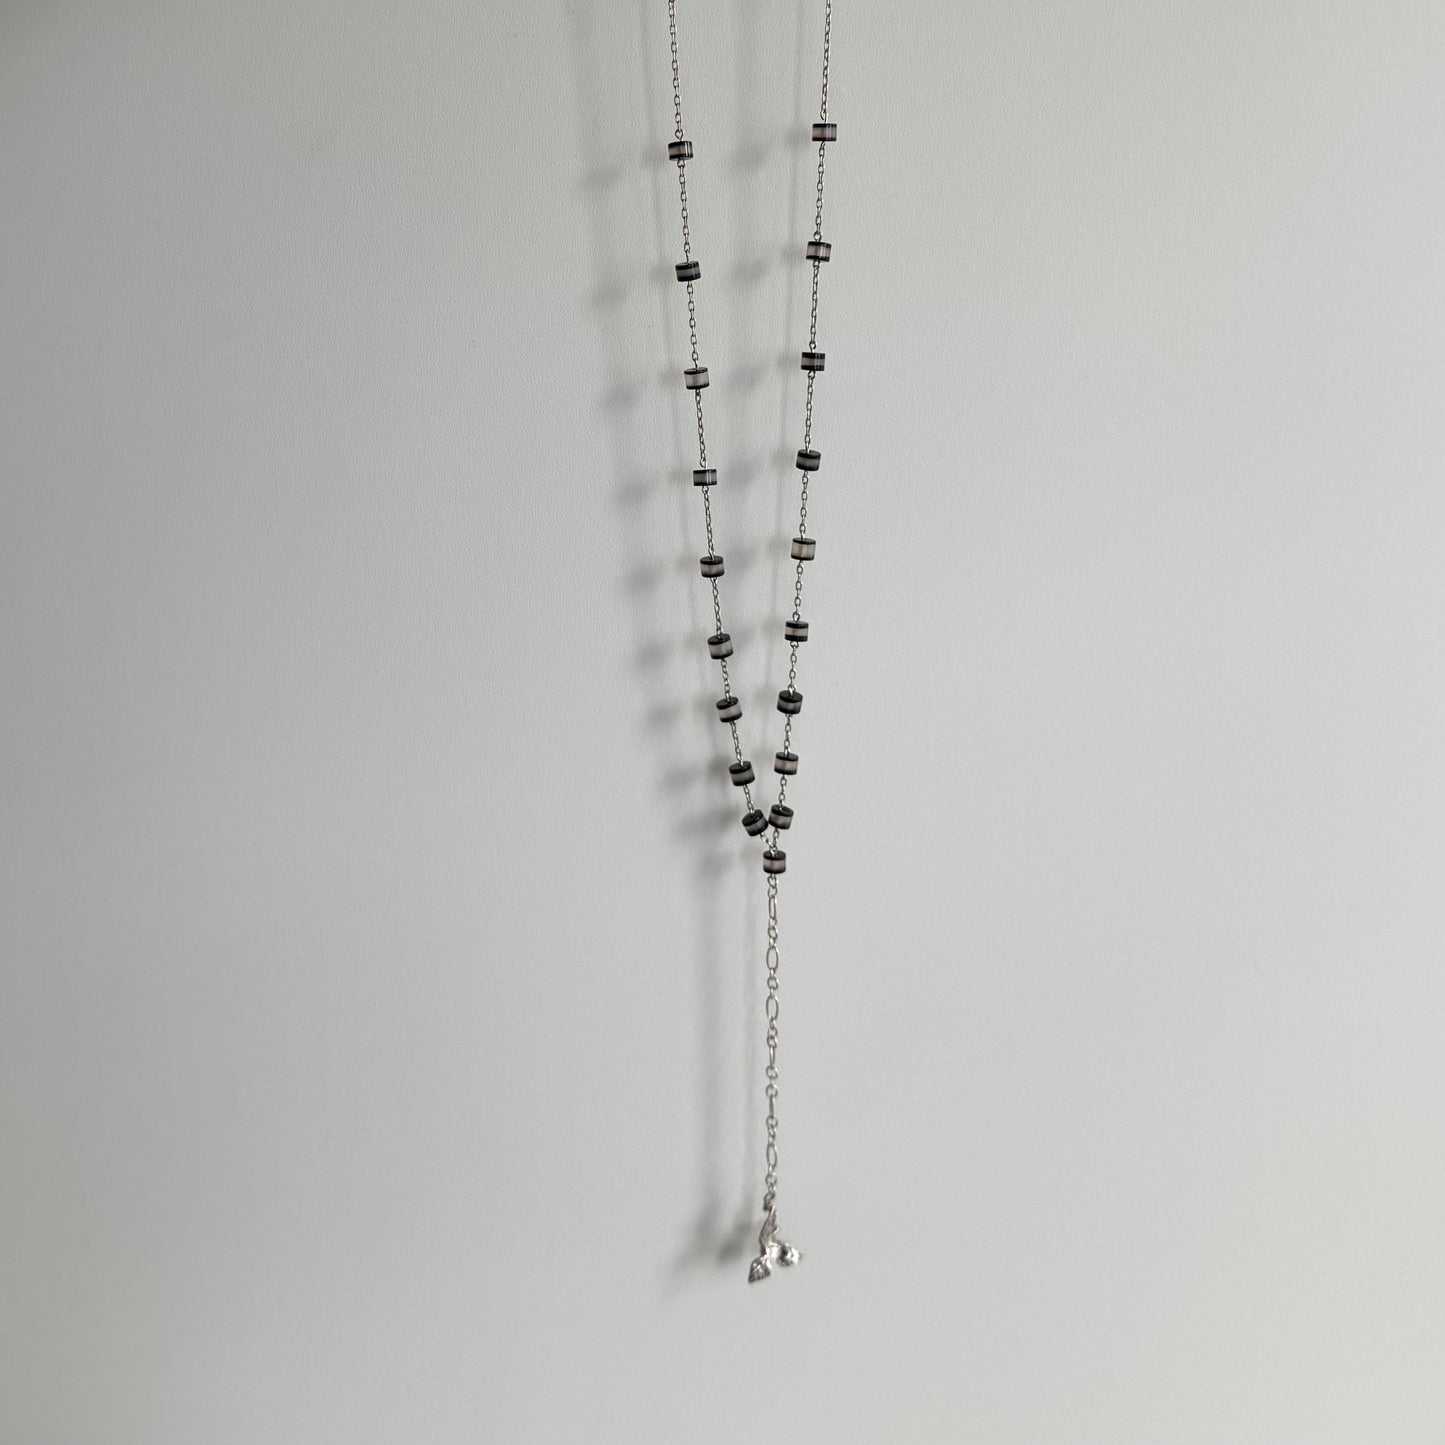 reimagined V I N T A G E // peace prayers / sterling silver and glass rosary style long chain / a necklace